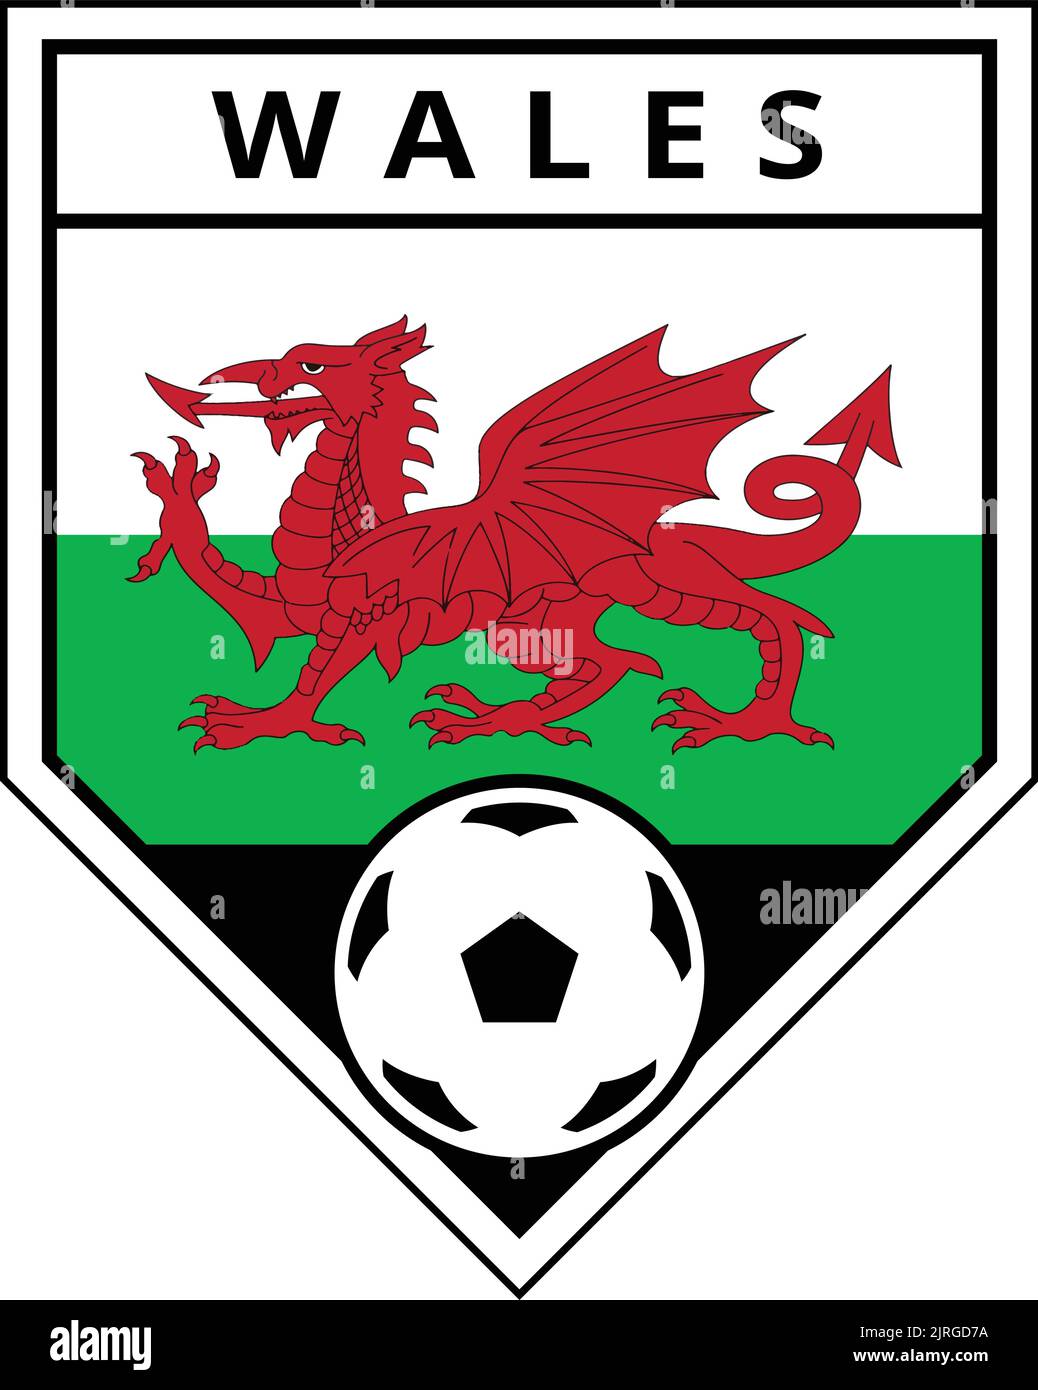 Illustration of Wales Angled Team Badge for Football Tournament Stock Vector